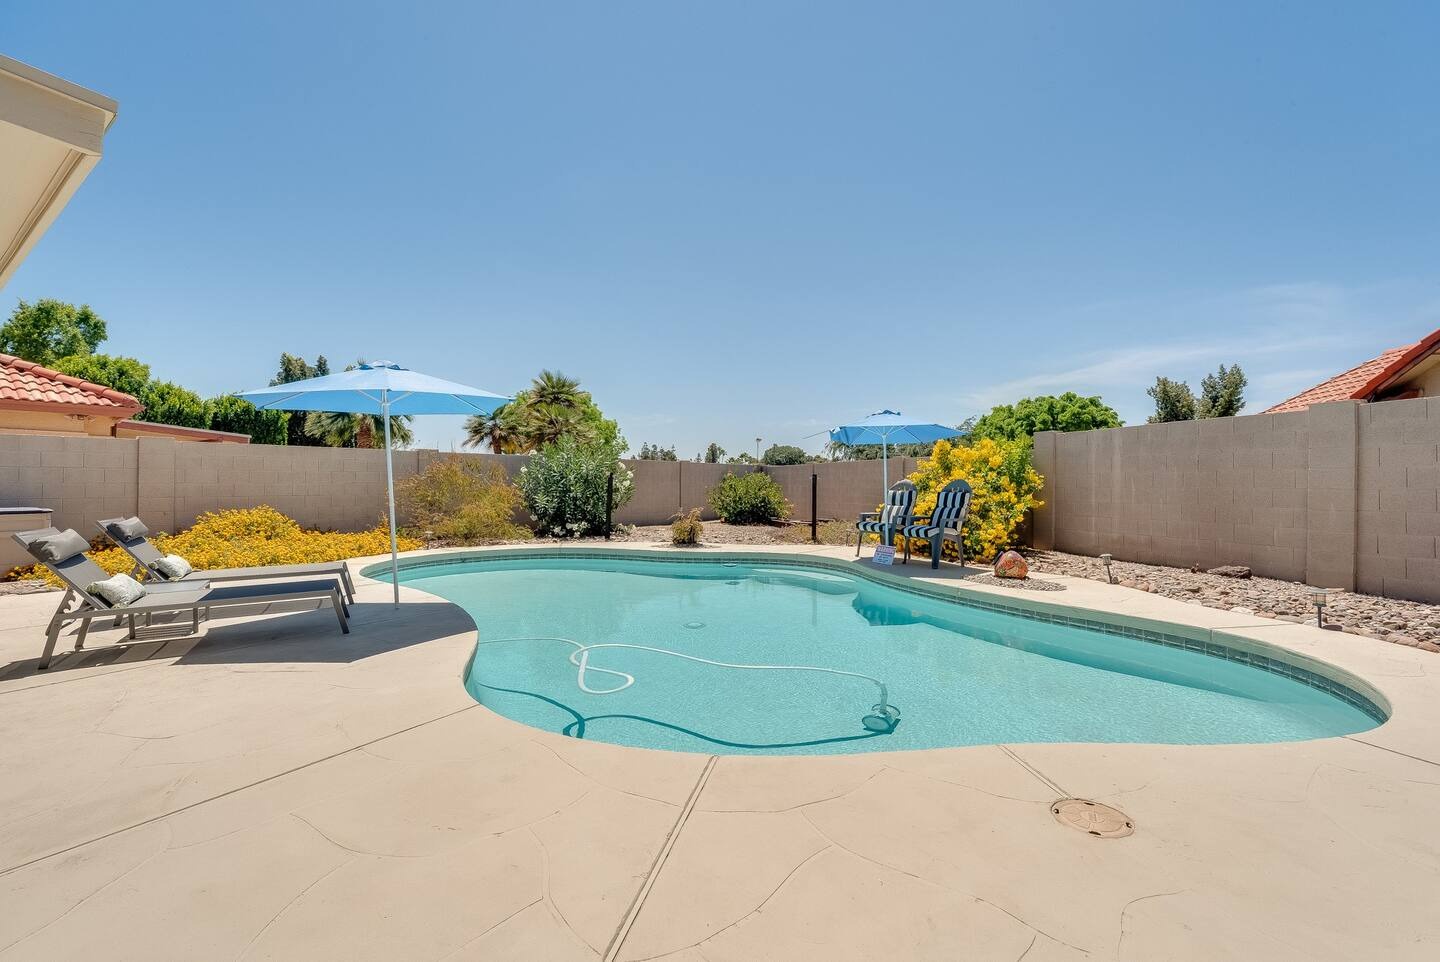 Glendale Vacation Rentals, Cahill Casa - Located just 30 minutes from the Phoenix Sky Harbor International Airport and downtown Phoenix, this exceptional home has everything you need to make your next visit one for the memory books.